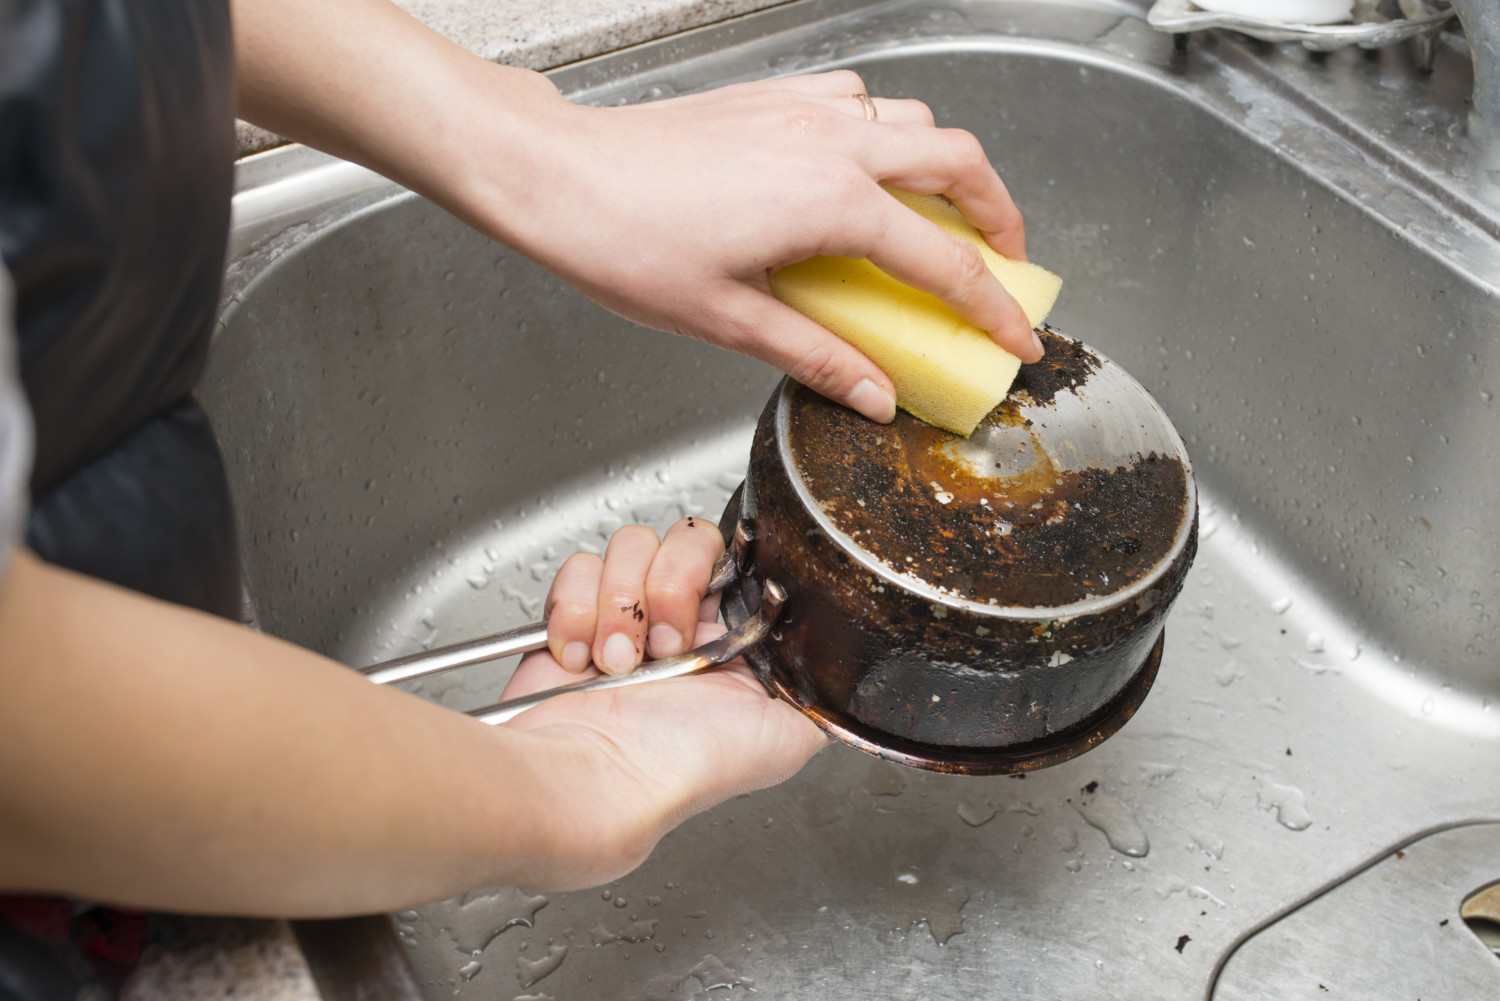 Hands scrub baked-on grease on cookware